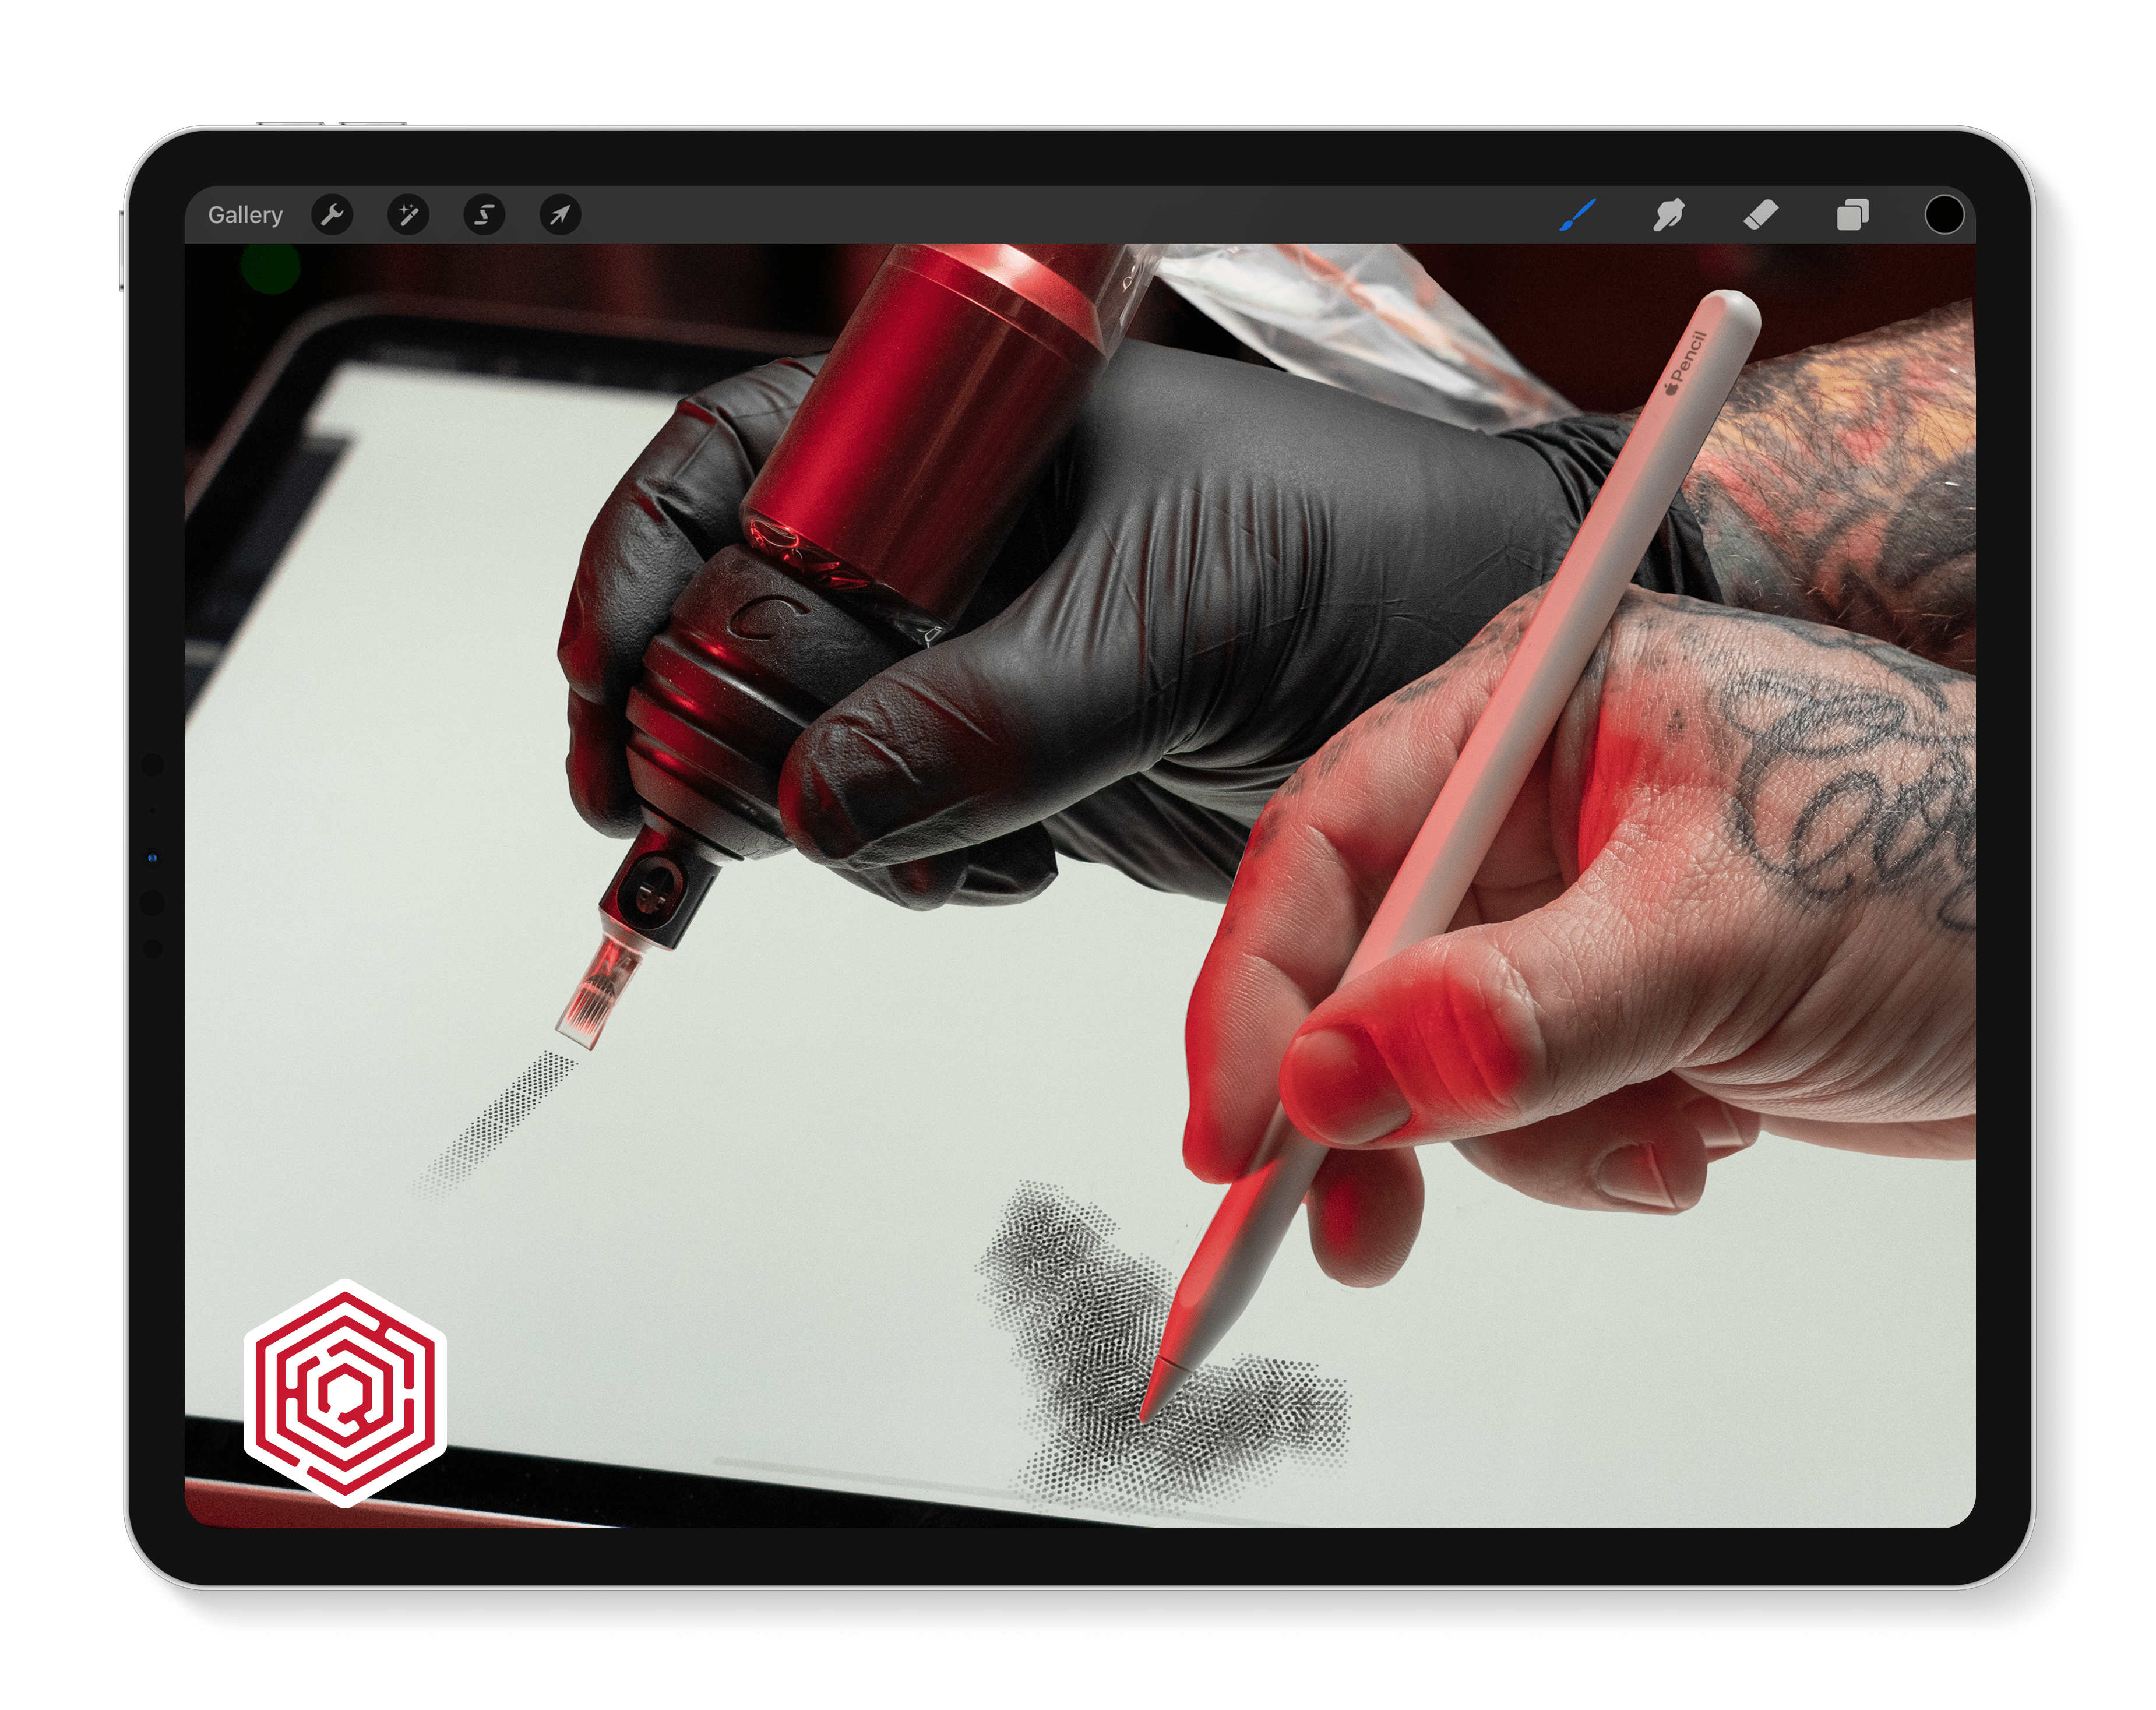 TatMasters  Read everything about Brush Stroke tattoos